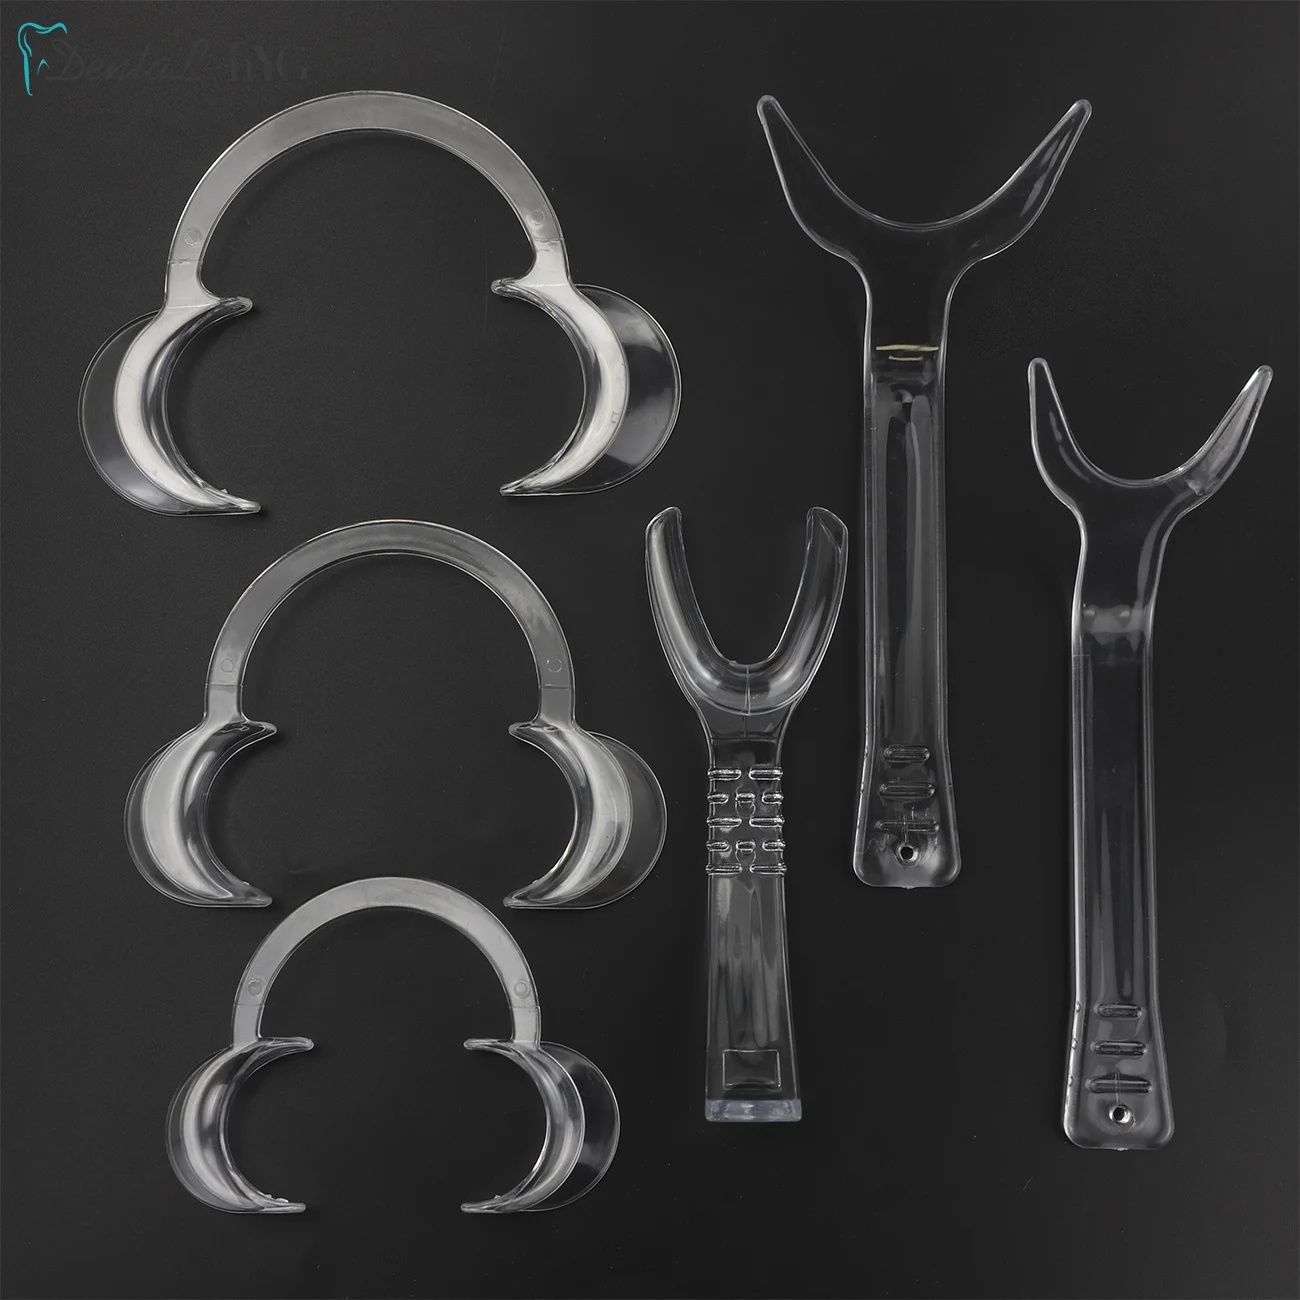 1Pc Dental Autoclavable Mouth Opener Orthodontic Lip Cheek Retractor Mouth Spreader Dental Implant Tray Dental Materials